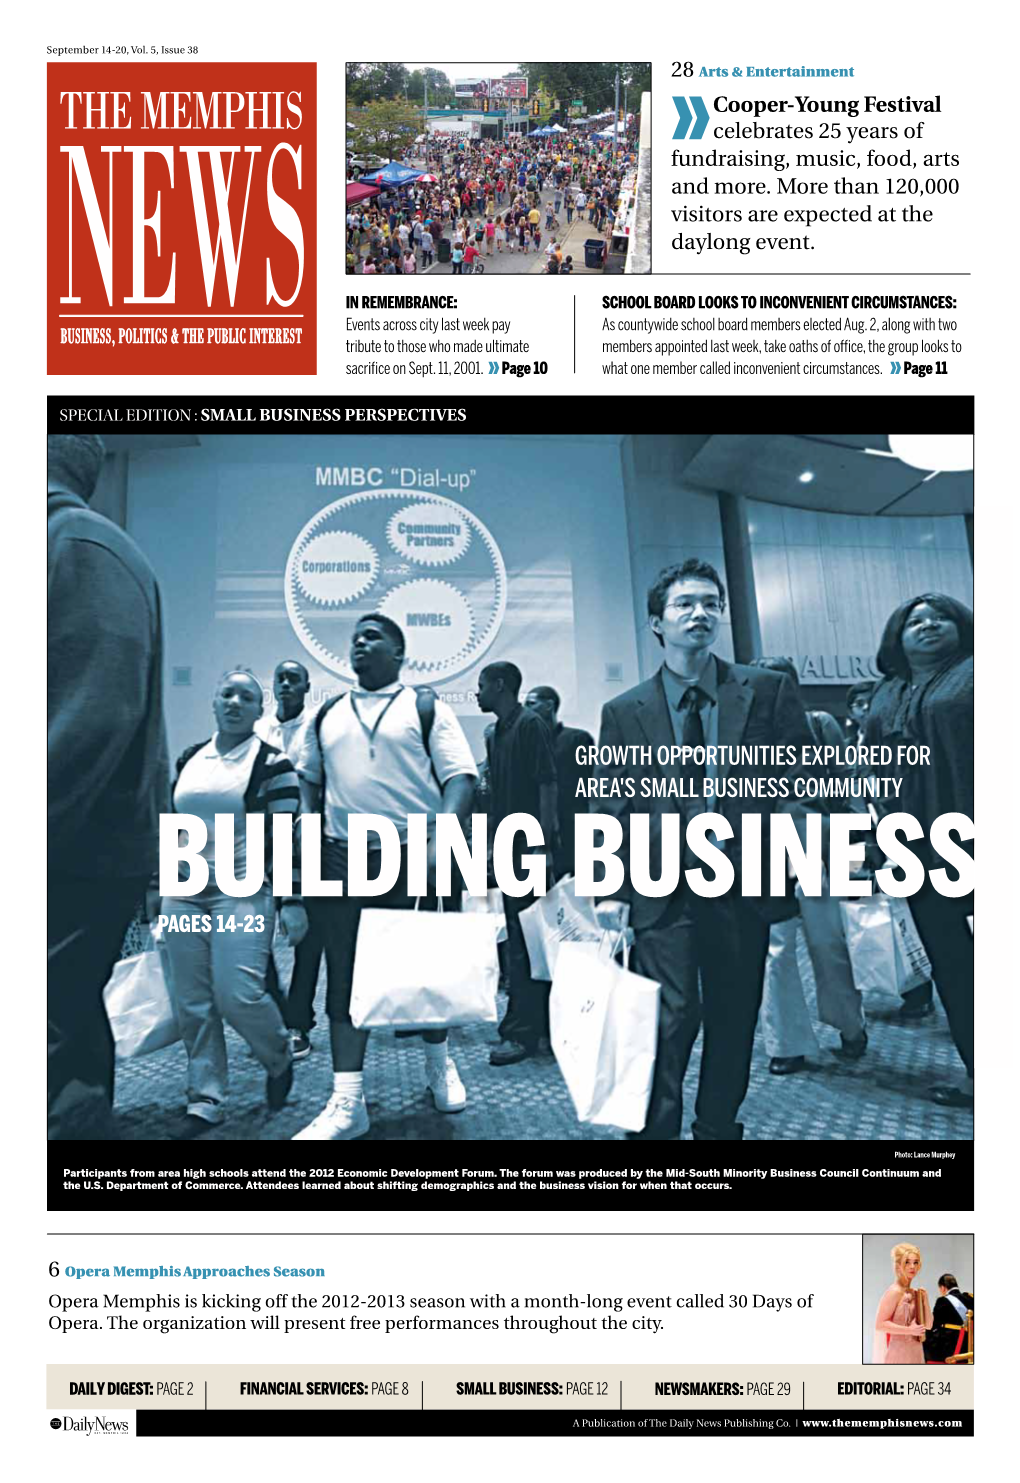 Growth Opportunities Explored for Area's Small Business Community BUILDING BUSINESS Pages 14-23